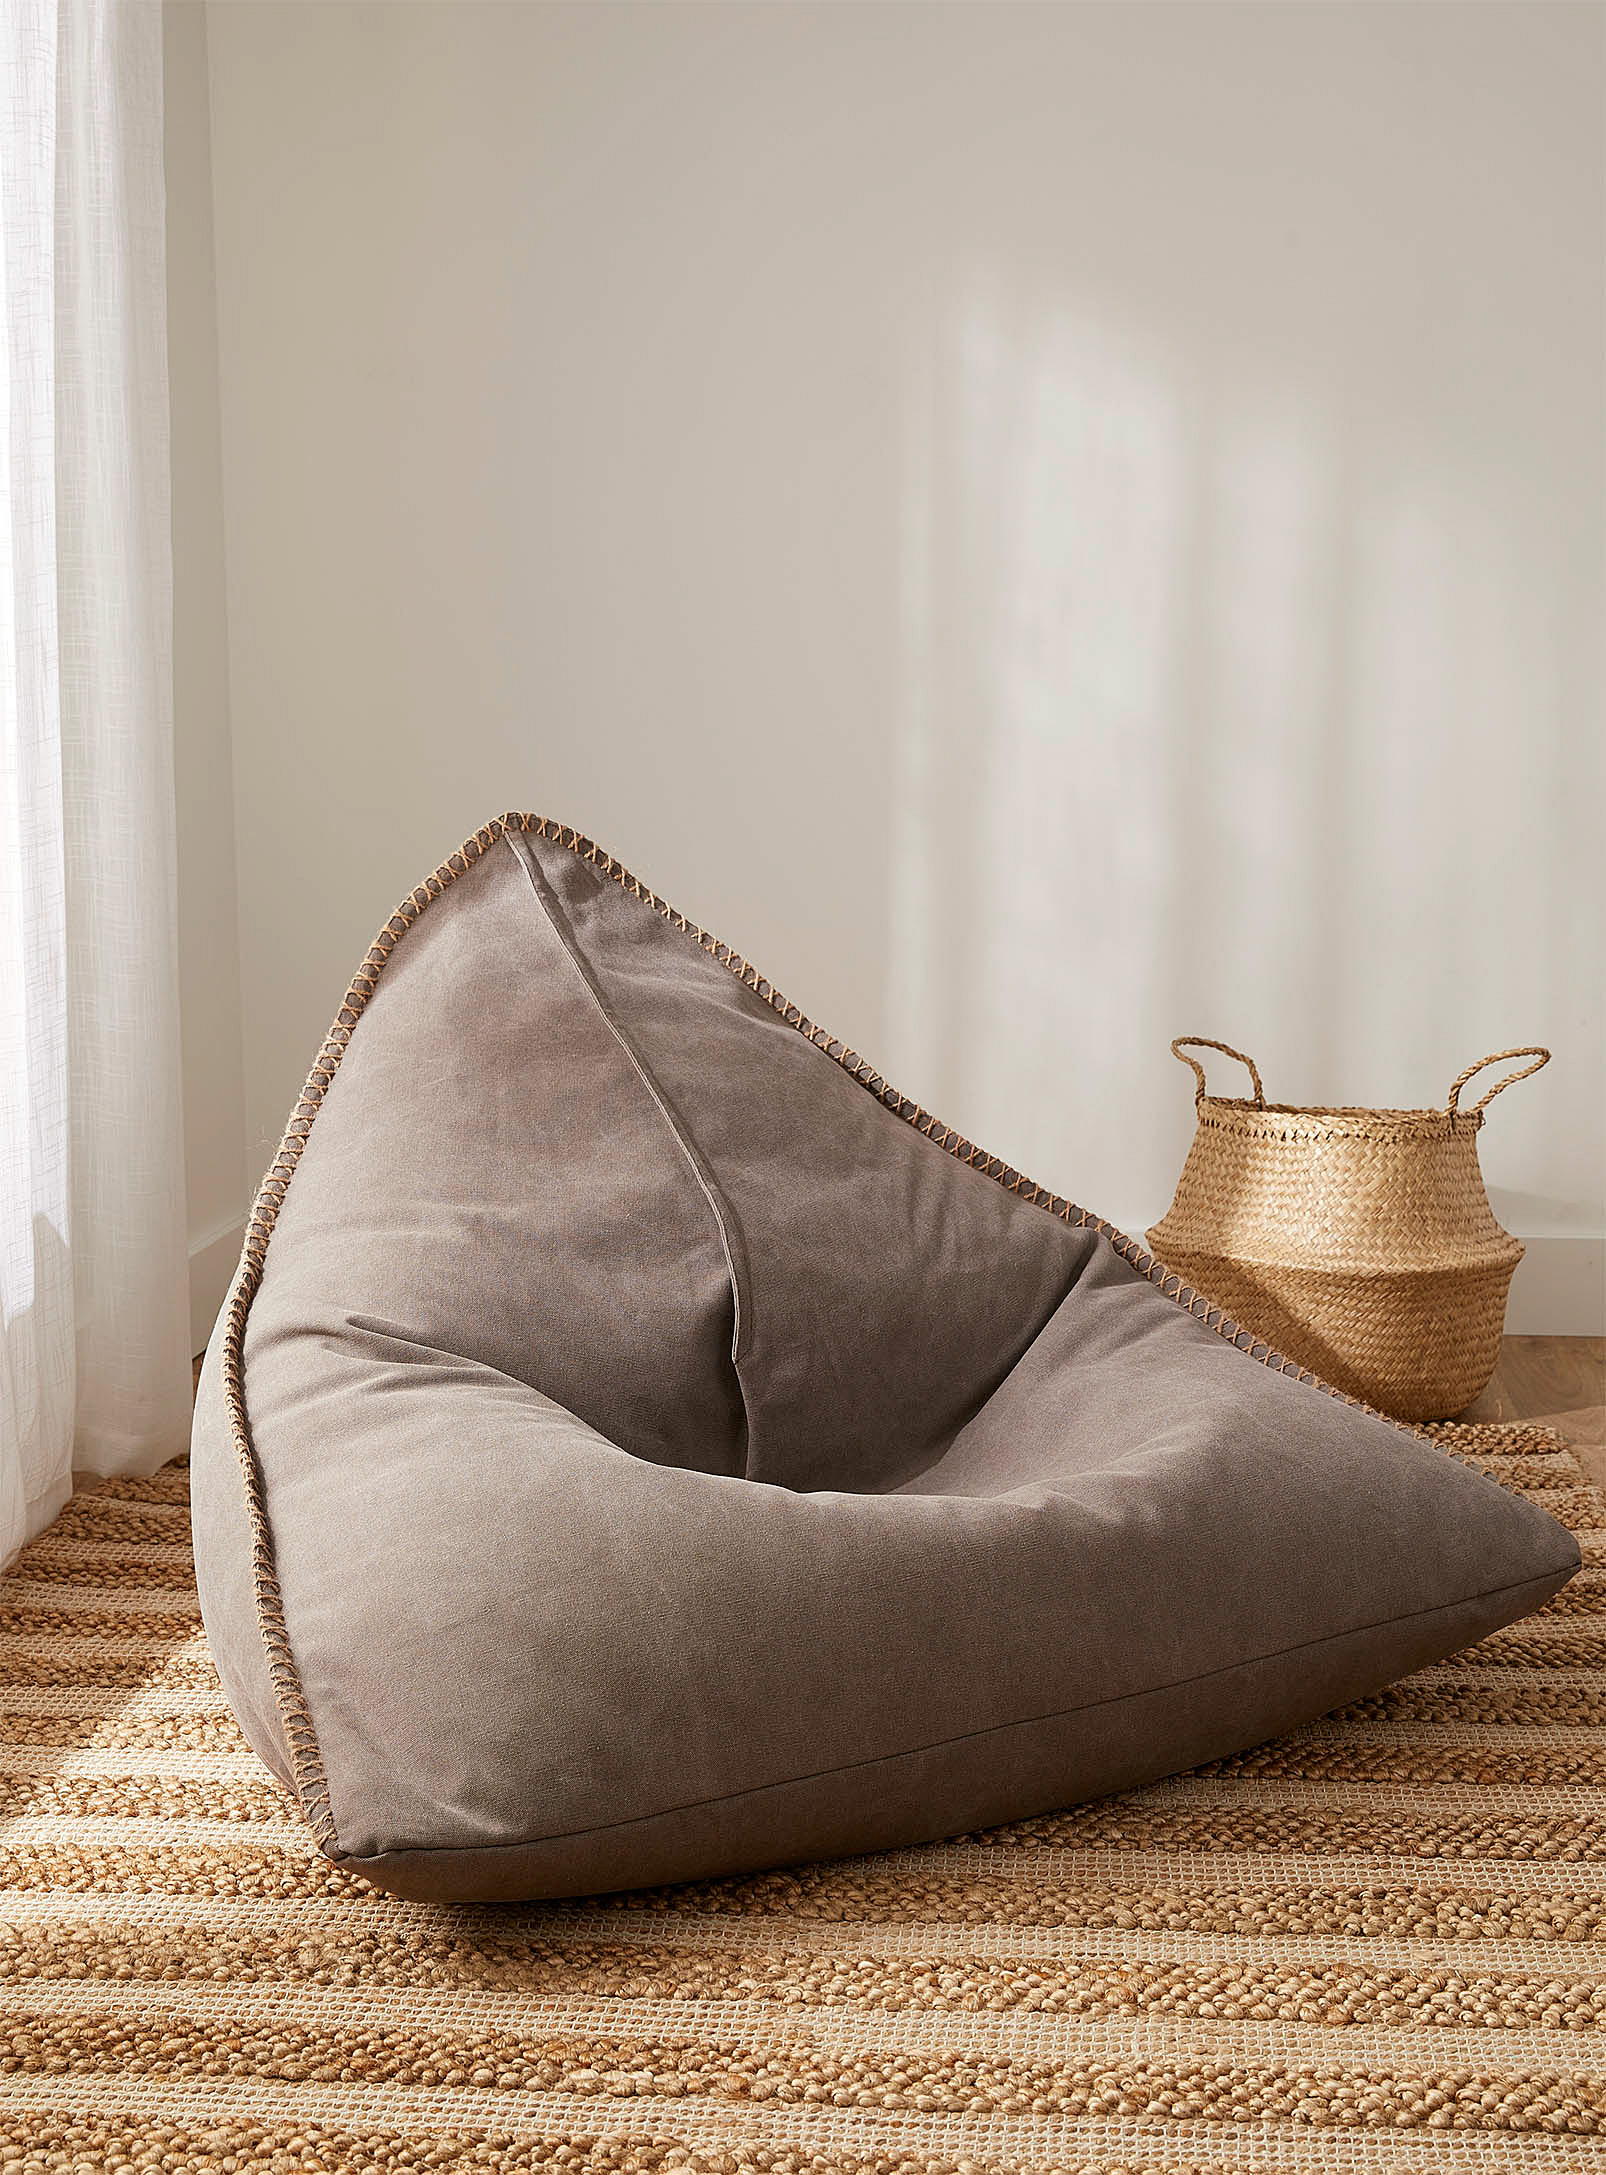 Norka Living Topstitch Rope Seam Beanbag Chair In Grey